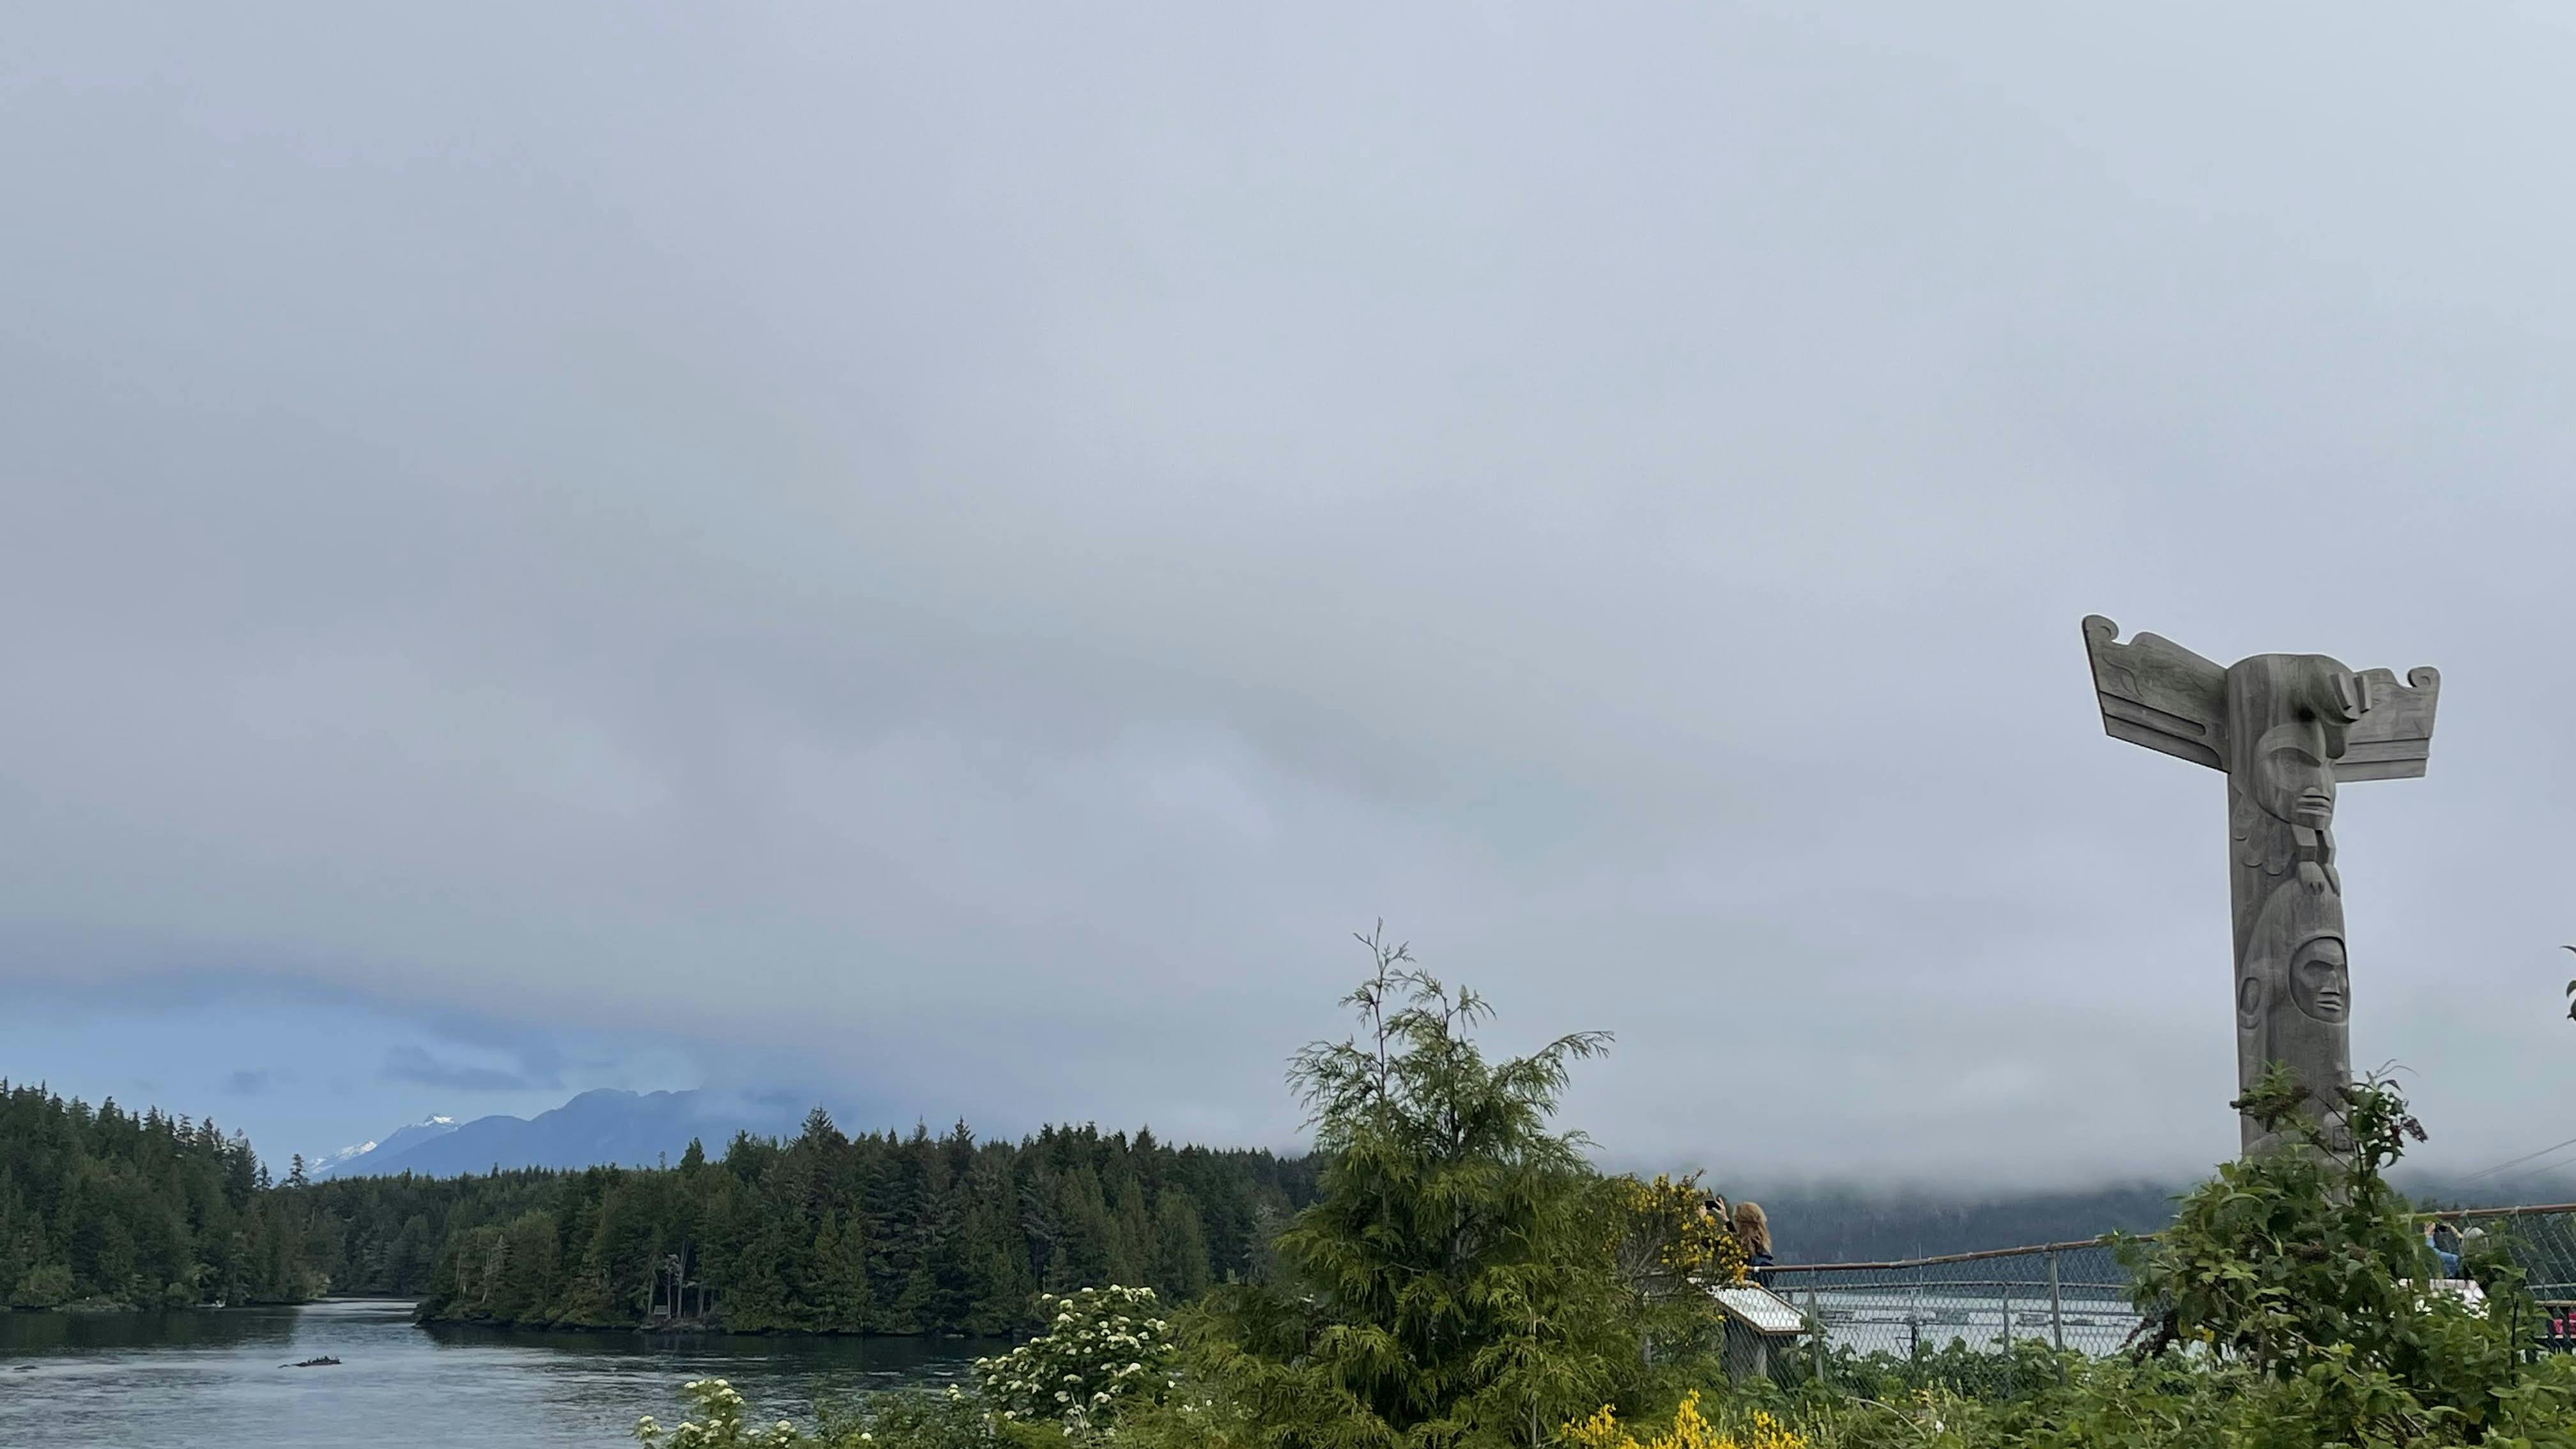 Meare's Island peaking through the clouds. A wooden totem pole off to the side in Tofino, BC.